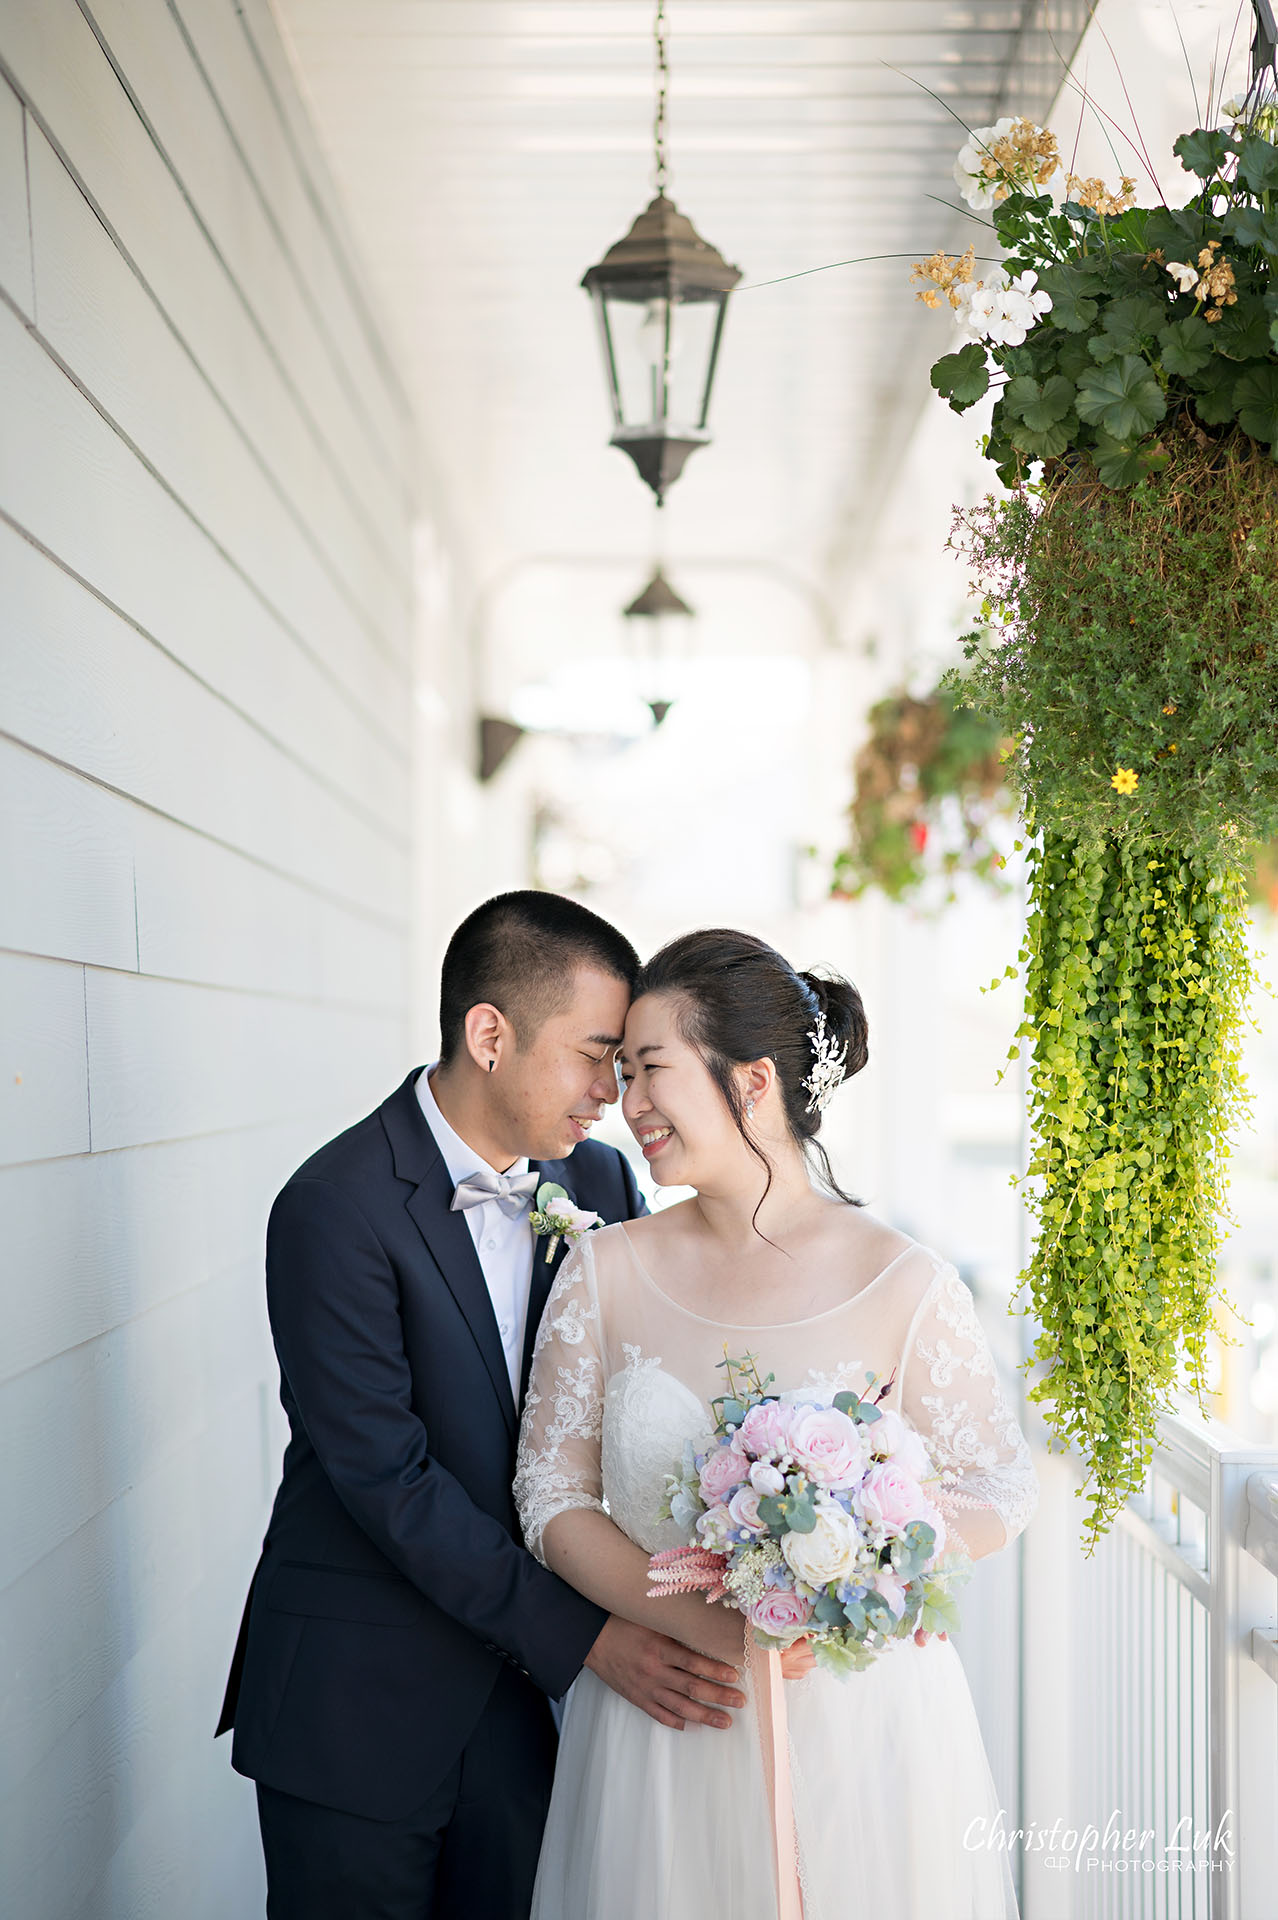 Christopher Luk Toronto Wedding Photographer The Doctor's House Chapel Kleinburg Natural Candid Photojournalistic Posed Bride Groom Hugging Holding Each Other Chandelier Hanging Plant Intimate Portrait Micro Microwedding 